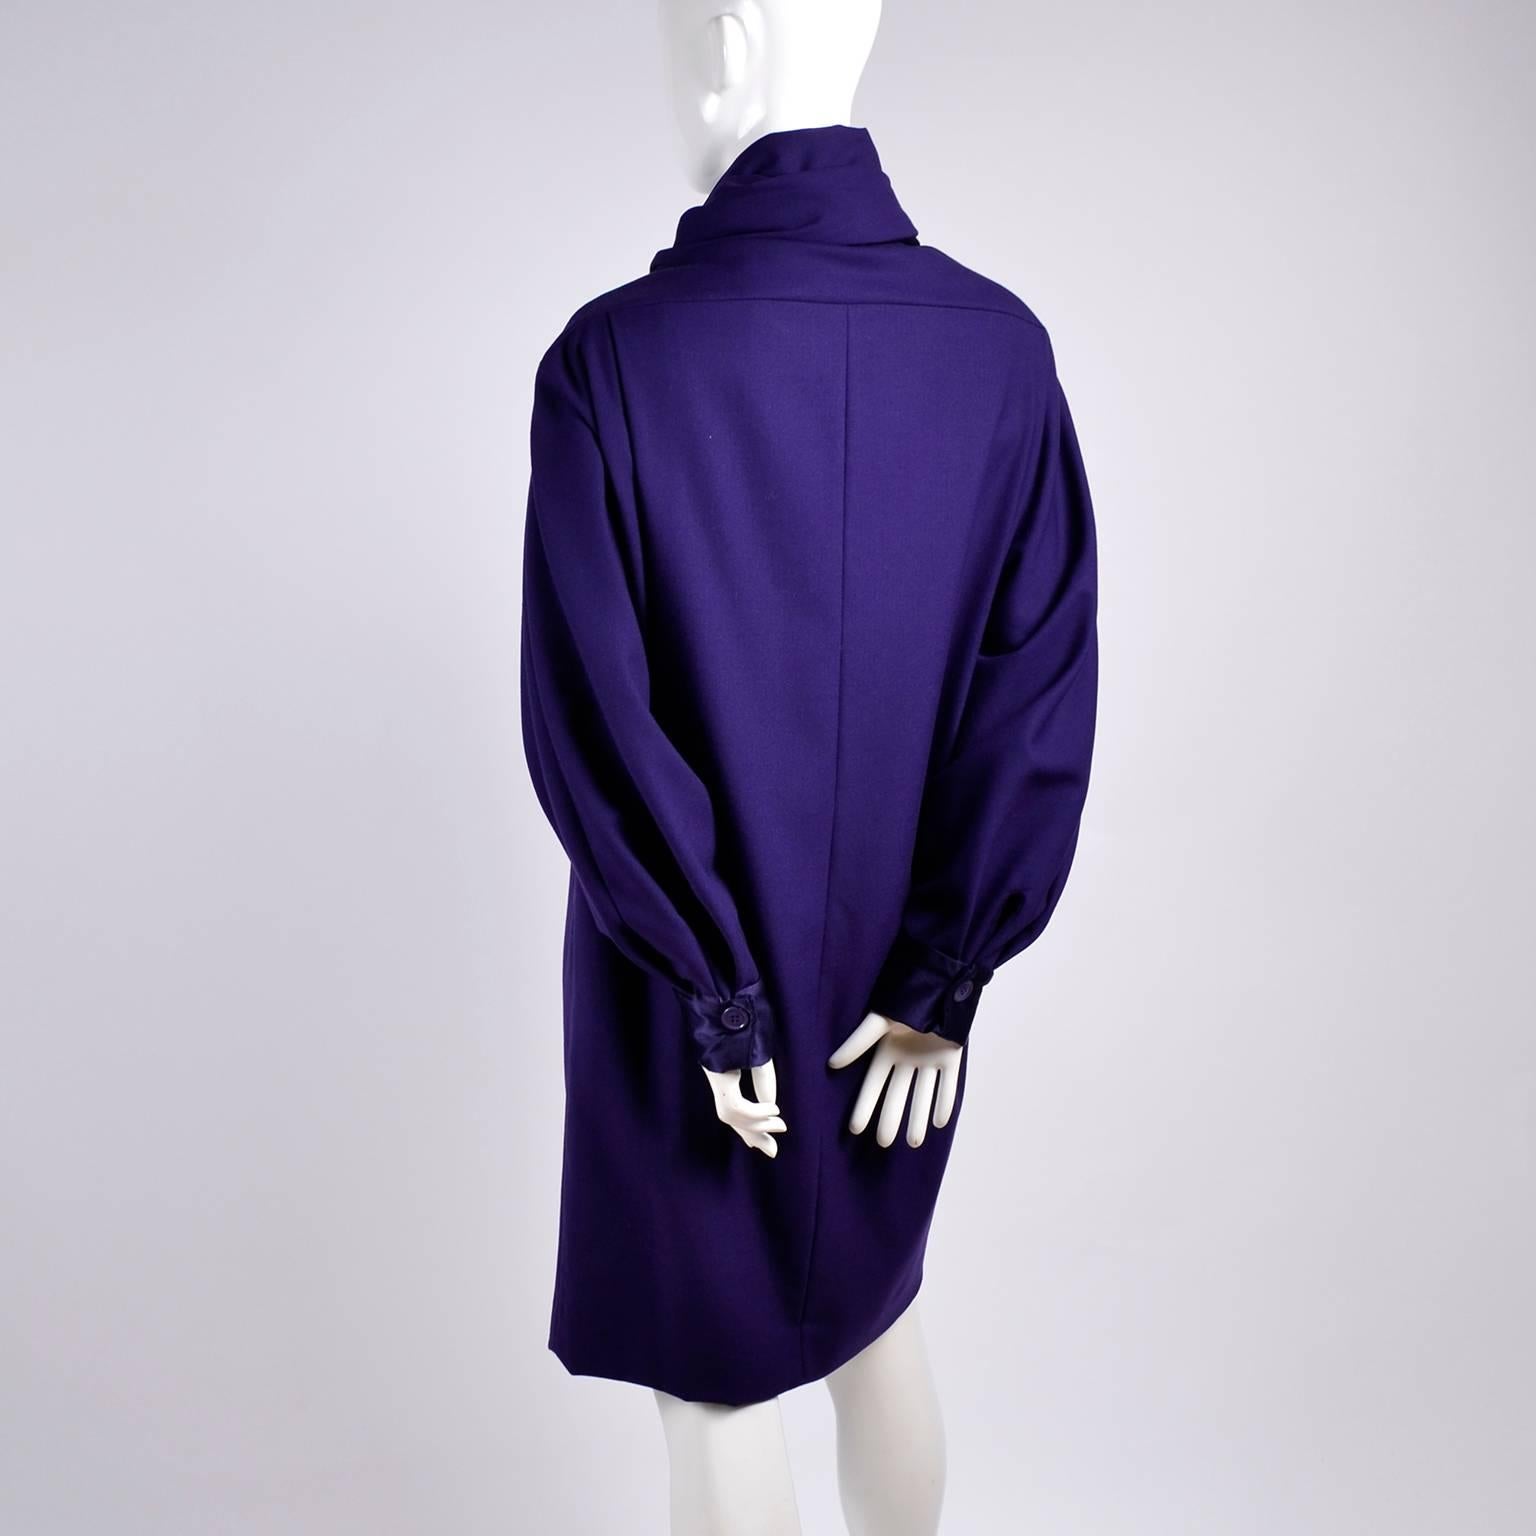 Ferre Italy Purple Wool 1990s Vintage Dress with Scarf M/L 1